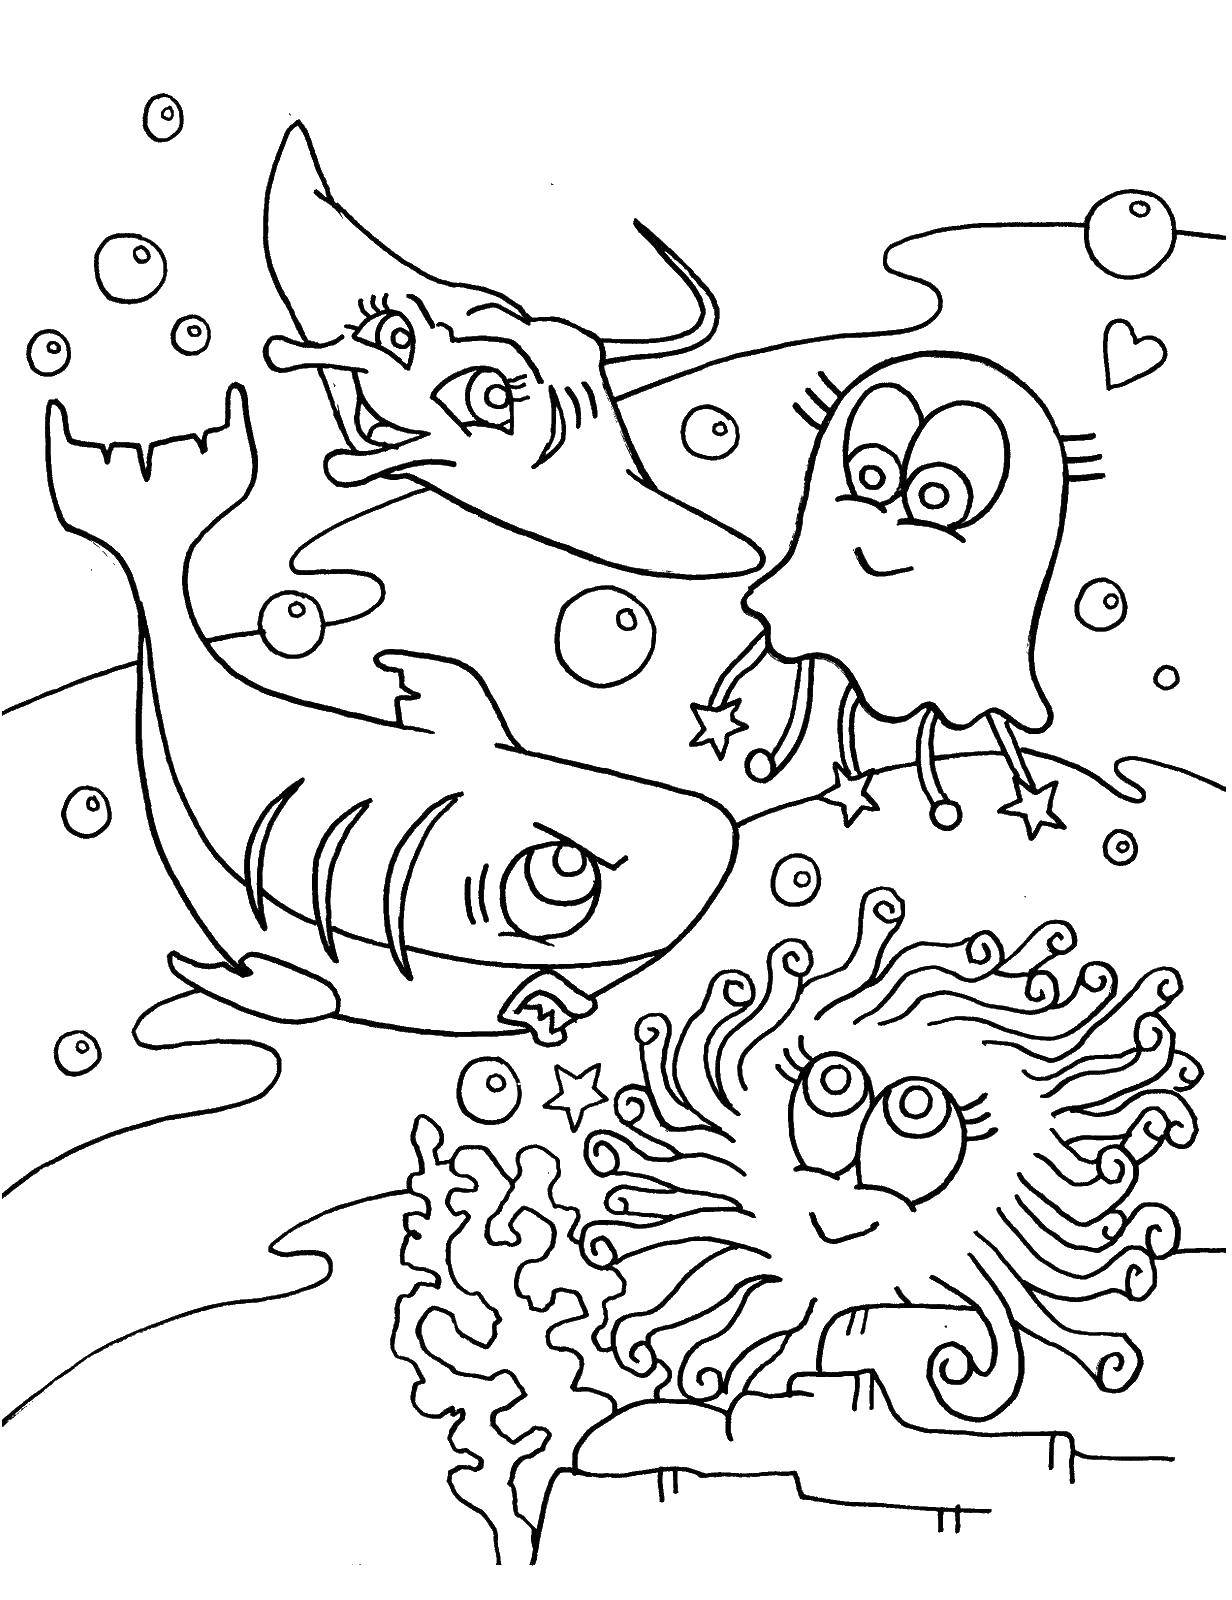 Coloring Octopus, shark, jellyfish and stingrays play under water. Category fish. Tags:  Underwater world, shark, Stingray, jellyfish, octopus.